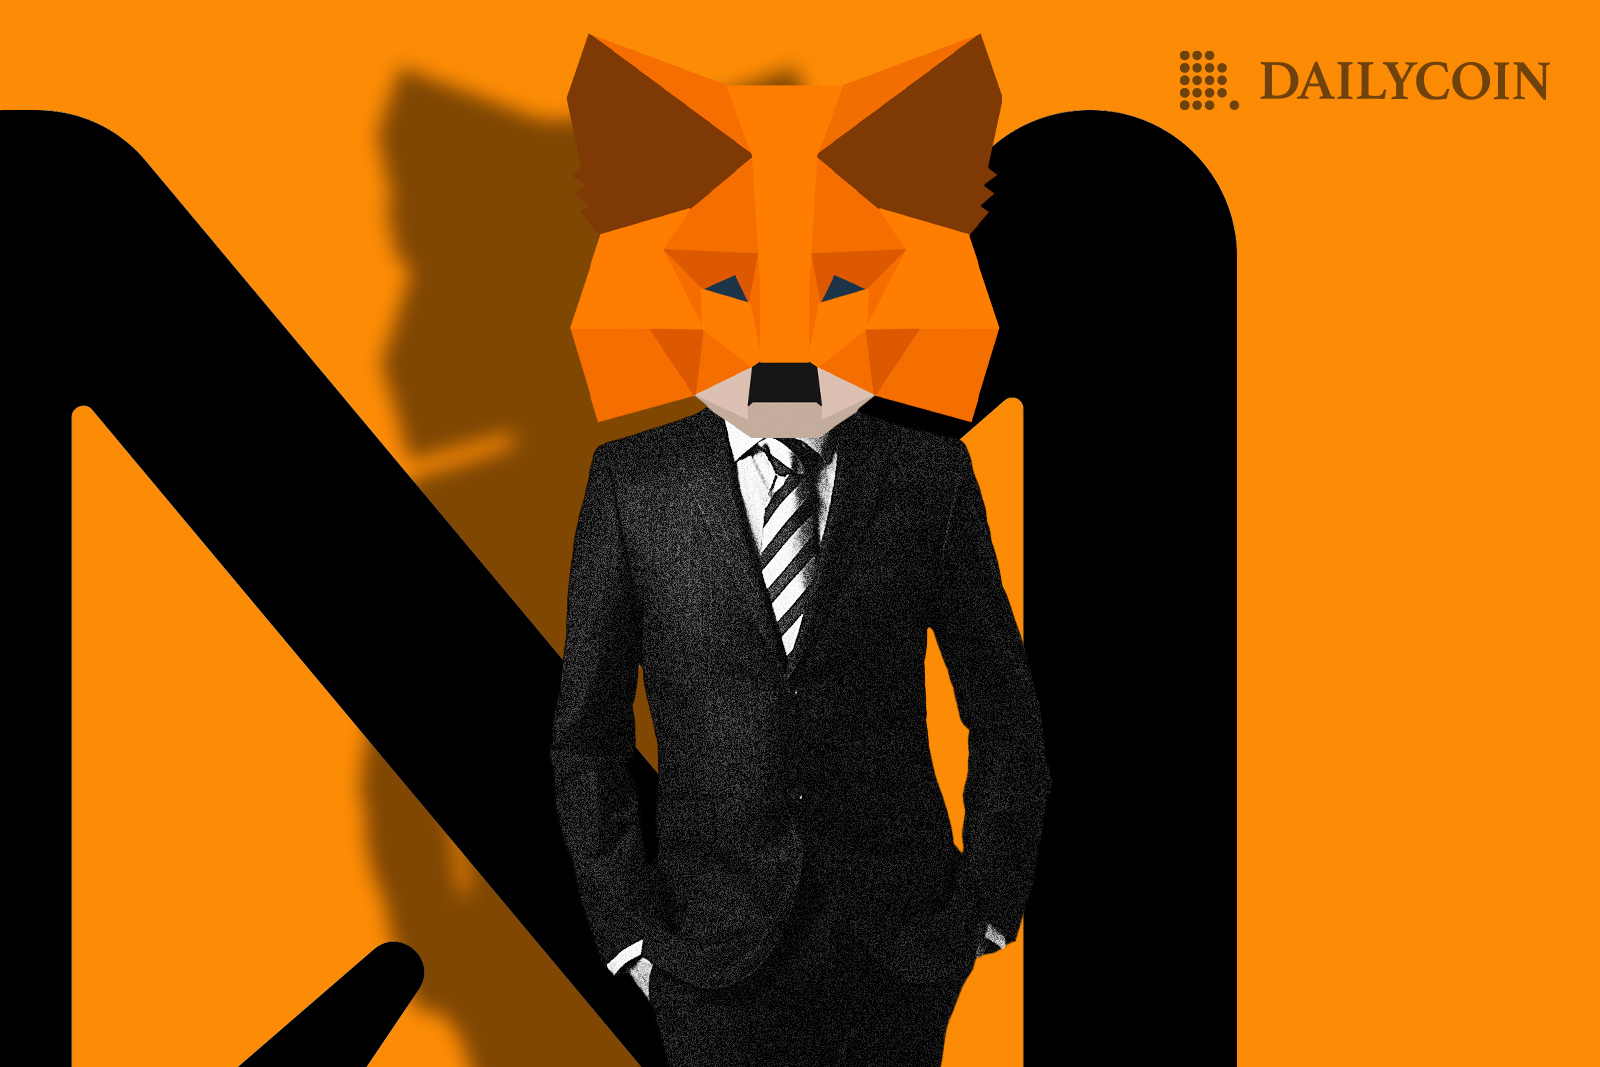 A man wearing a suit and a MetaMask logo mask